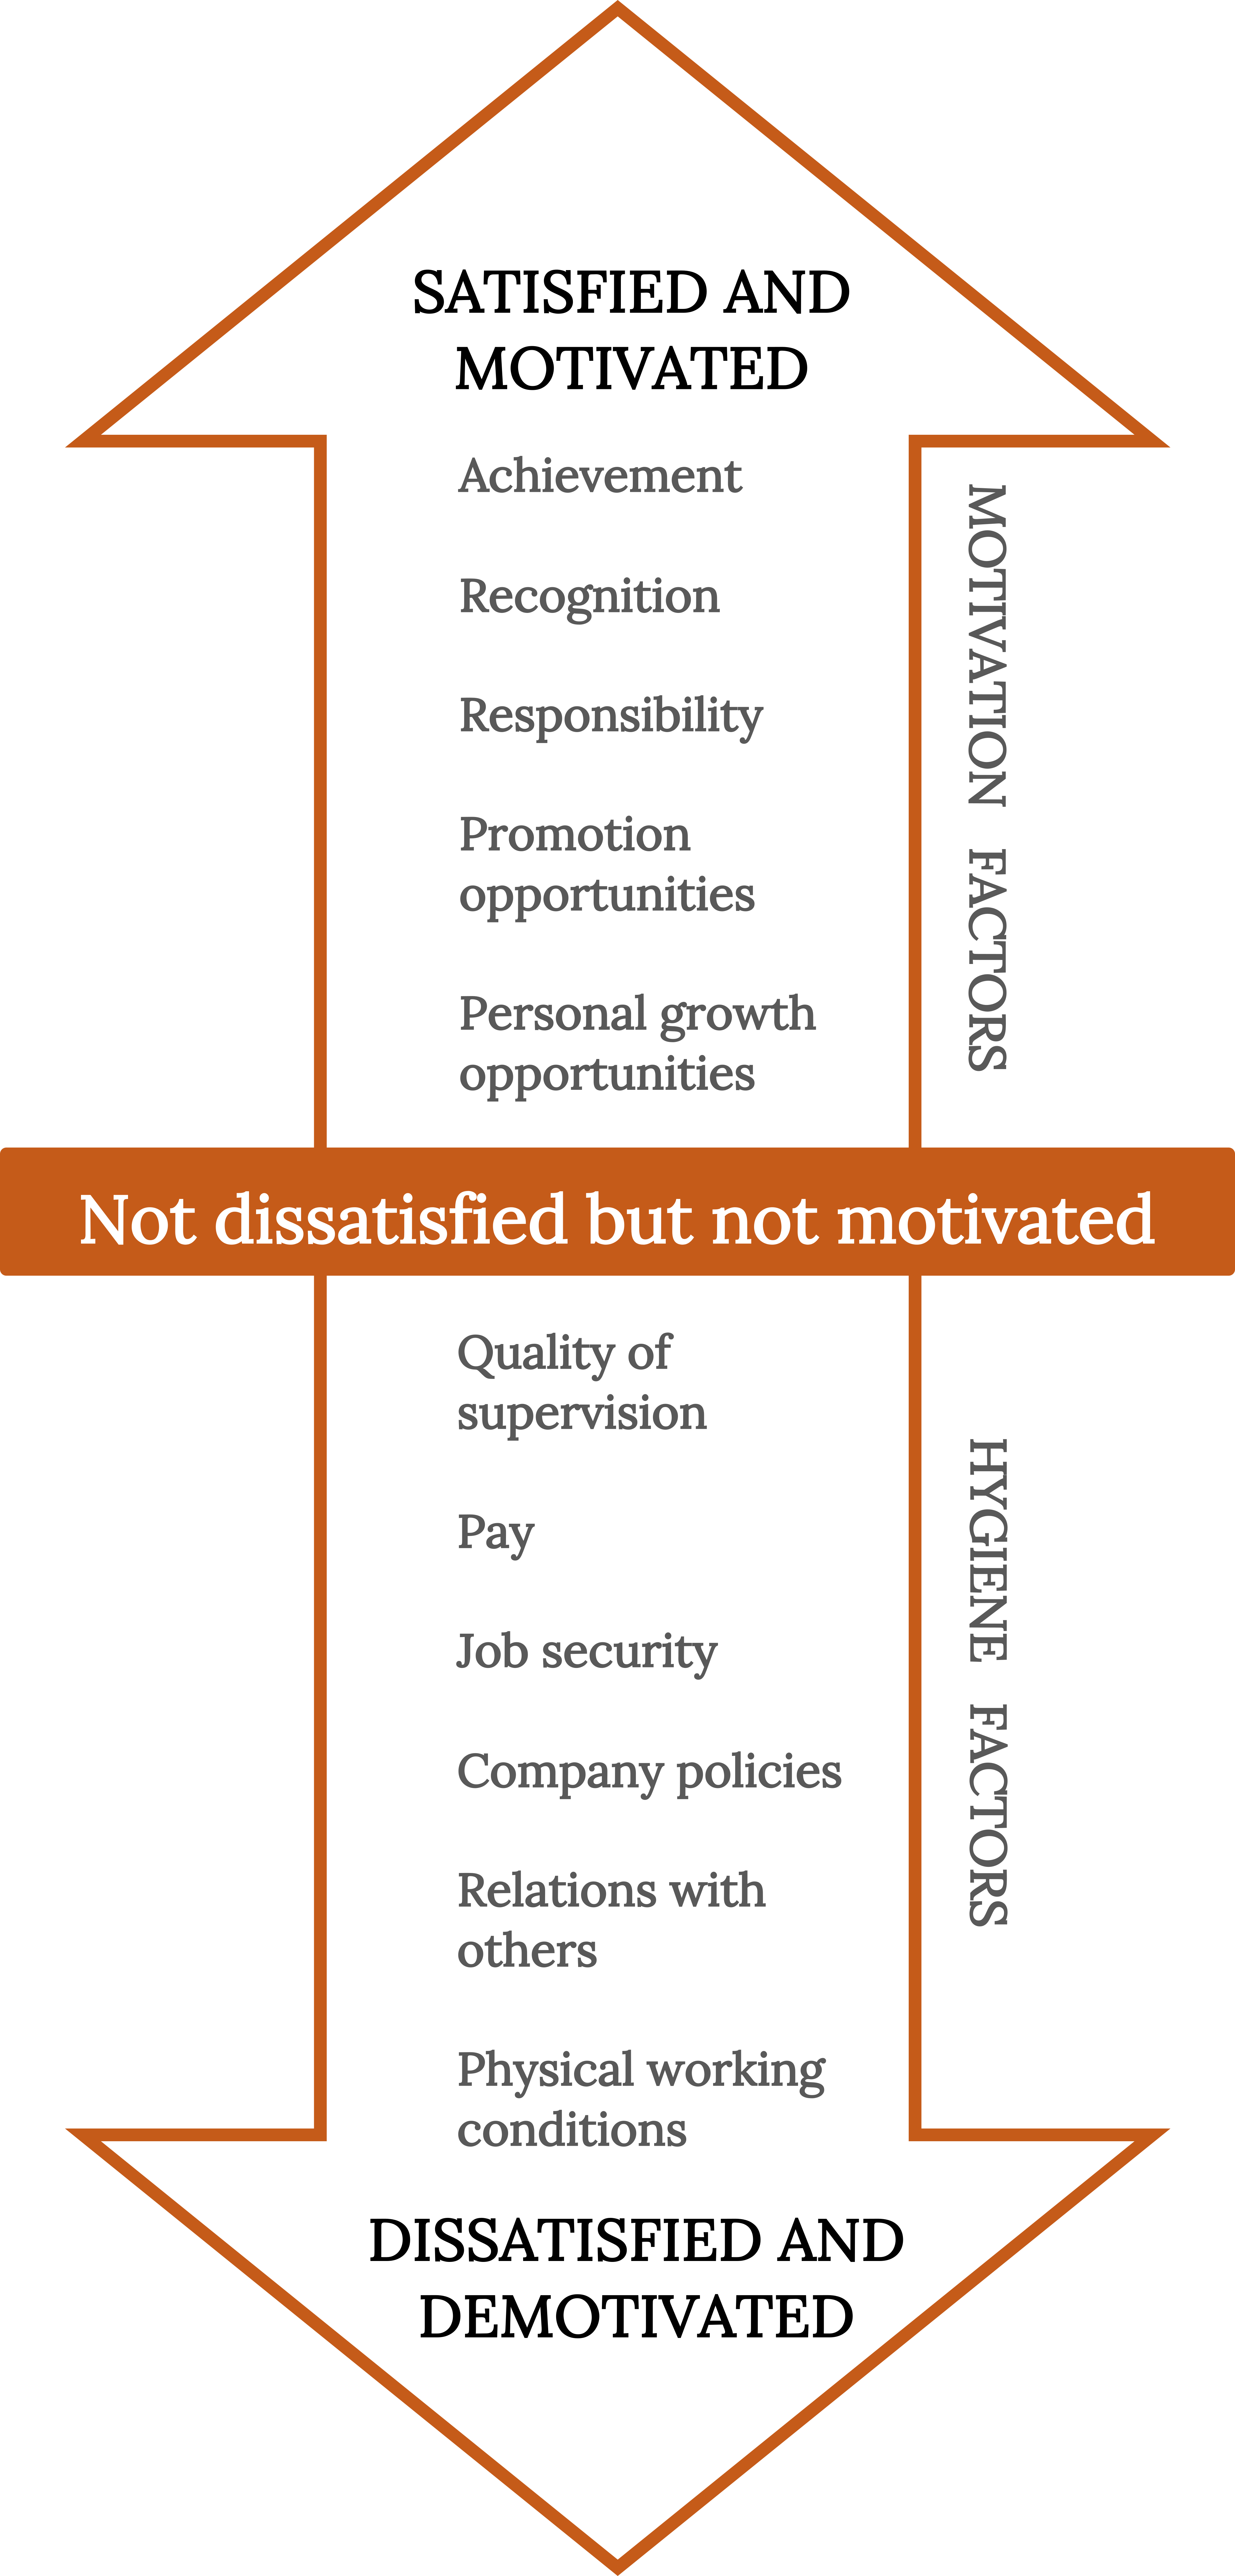 An arrow running north to south with a textbox in the middle saying 'not dissatisfied but not motivated.' the top of the arrow reads 'satisfied and motivated' and the bottom of the arrow reads 'dissatisfied and demotivated.' The middle of the arrow lists motivation factors (achievement, recognition, responsibility, promotion opportunities, personal growth opportunities) and hygiene factors (quality of supervision, pay, job security, company policies, relations with others, physical working conditions).